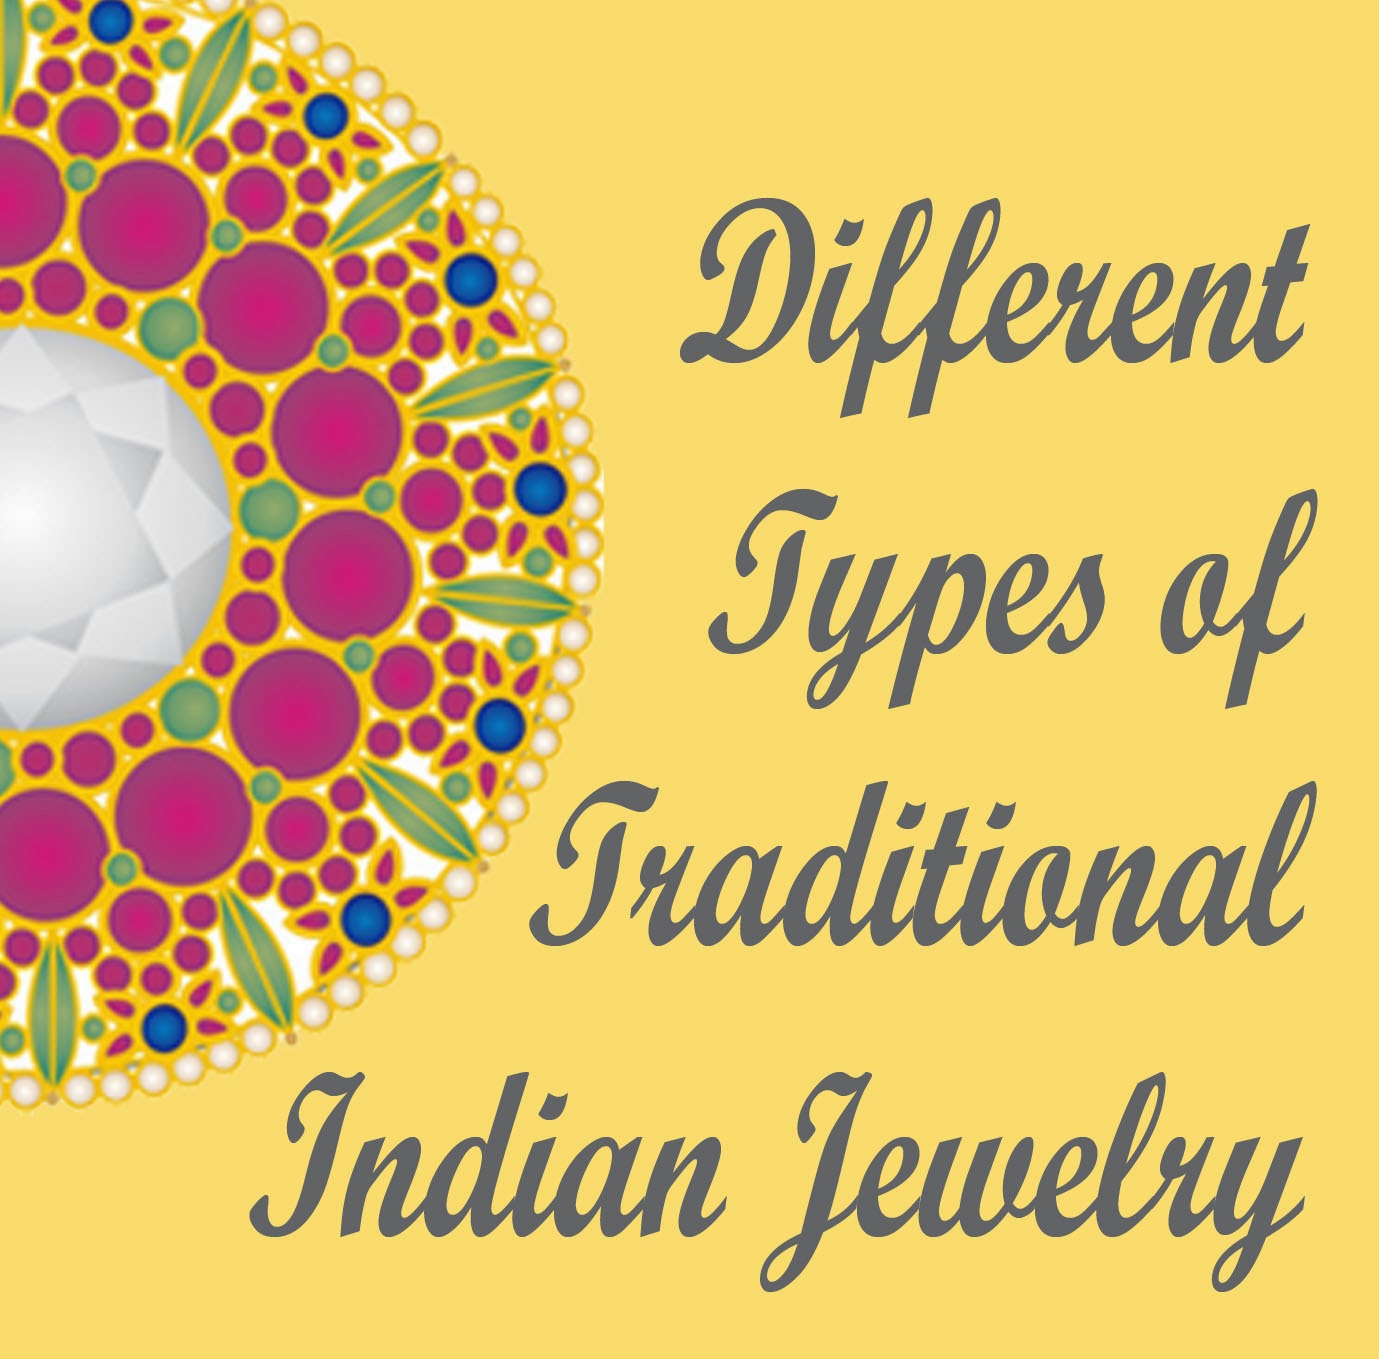 Types of Indian Jewellery